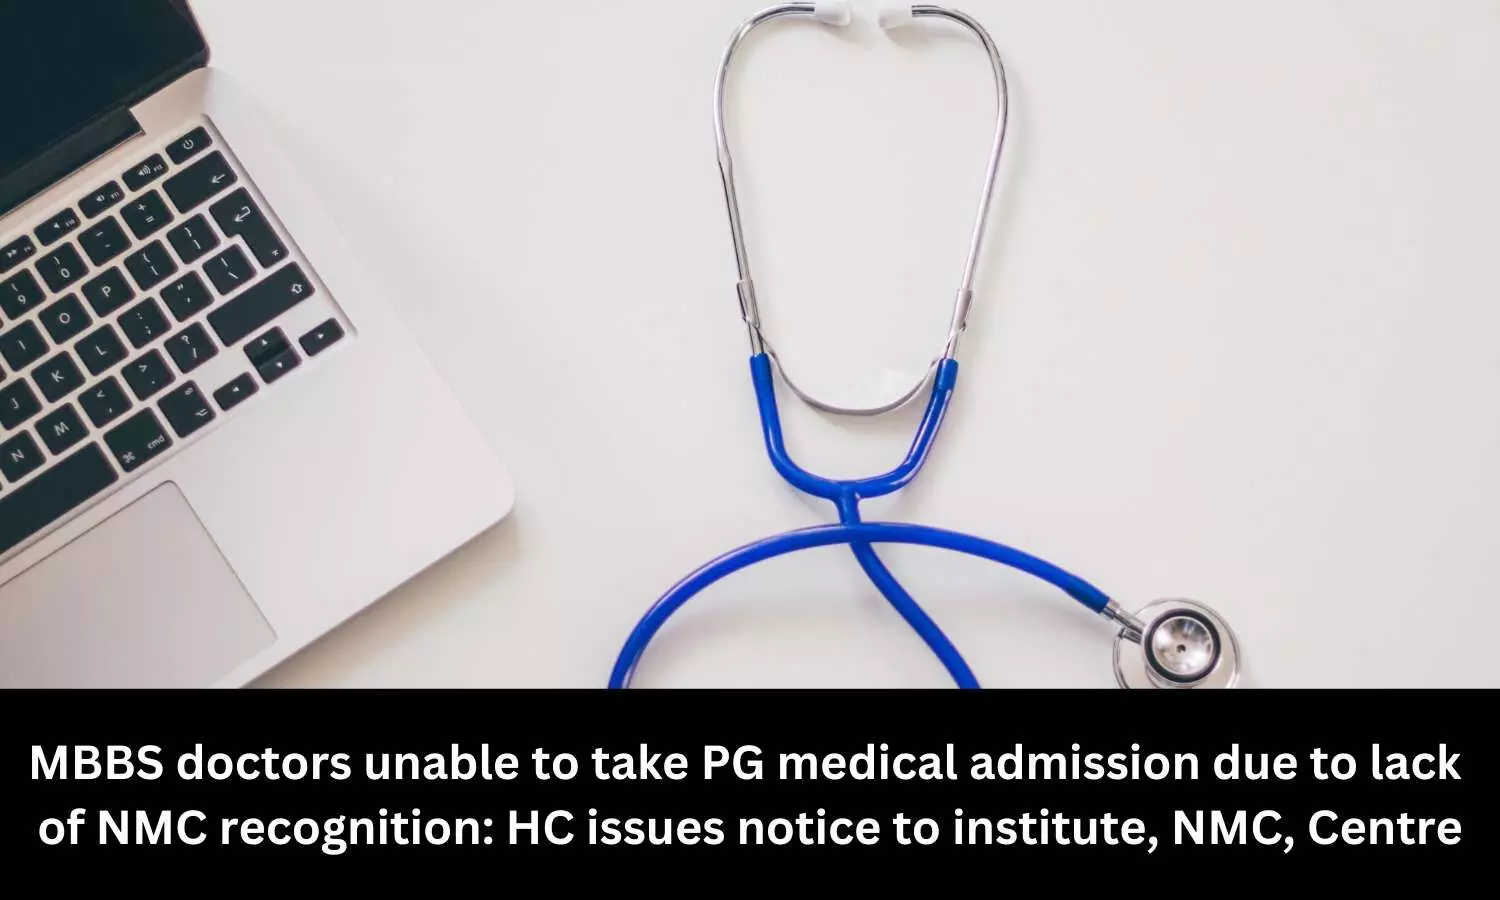 MBBS doctors unable to take PG medical admission due to lack of NMC recognition: HC issues notice to institute, NMC, Centre